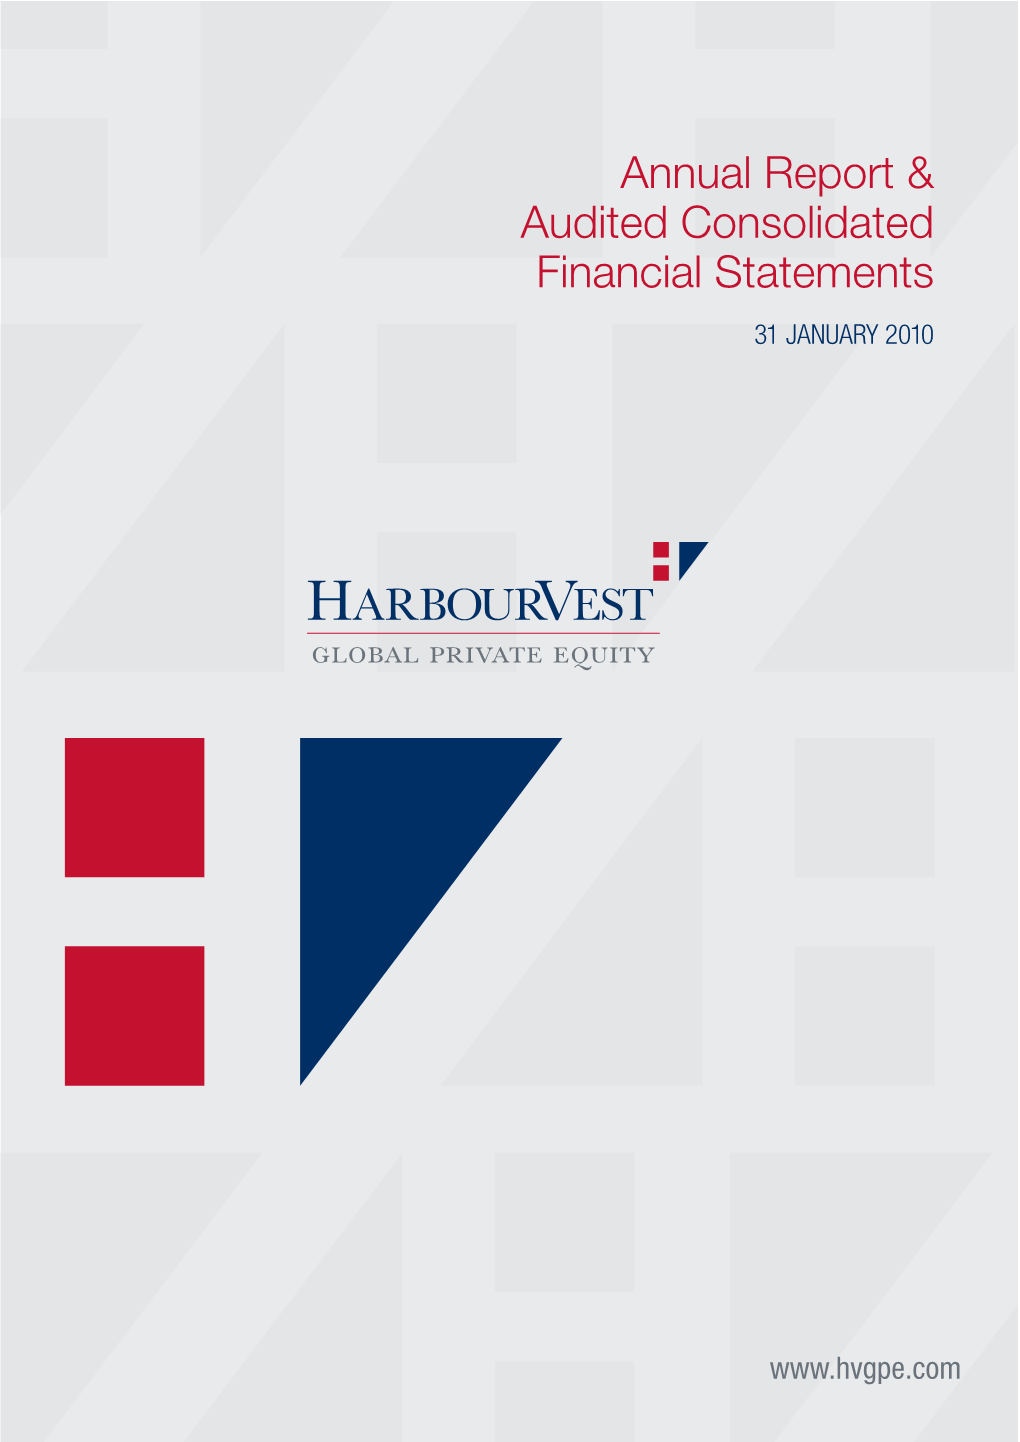 Annual Report & Audited Consolidated Financial Statements